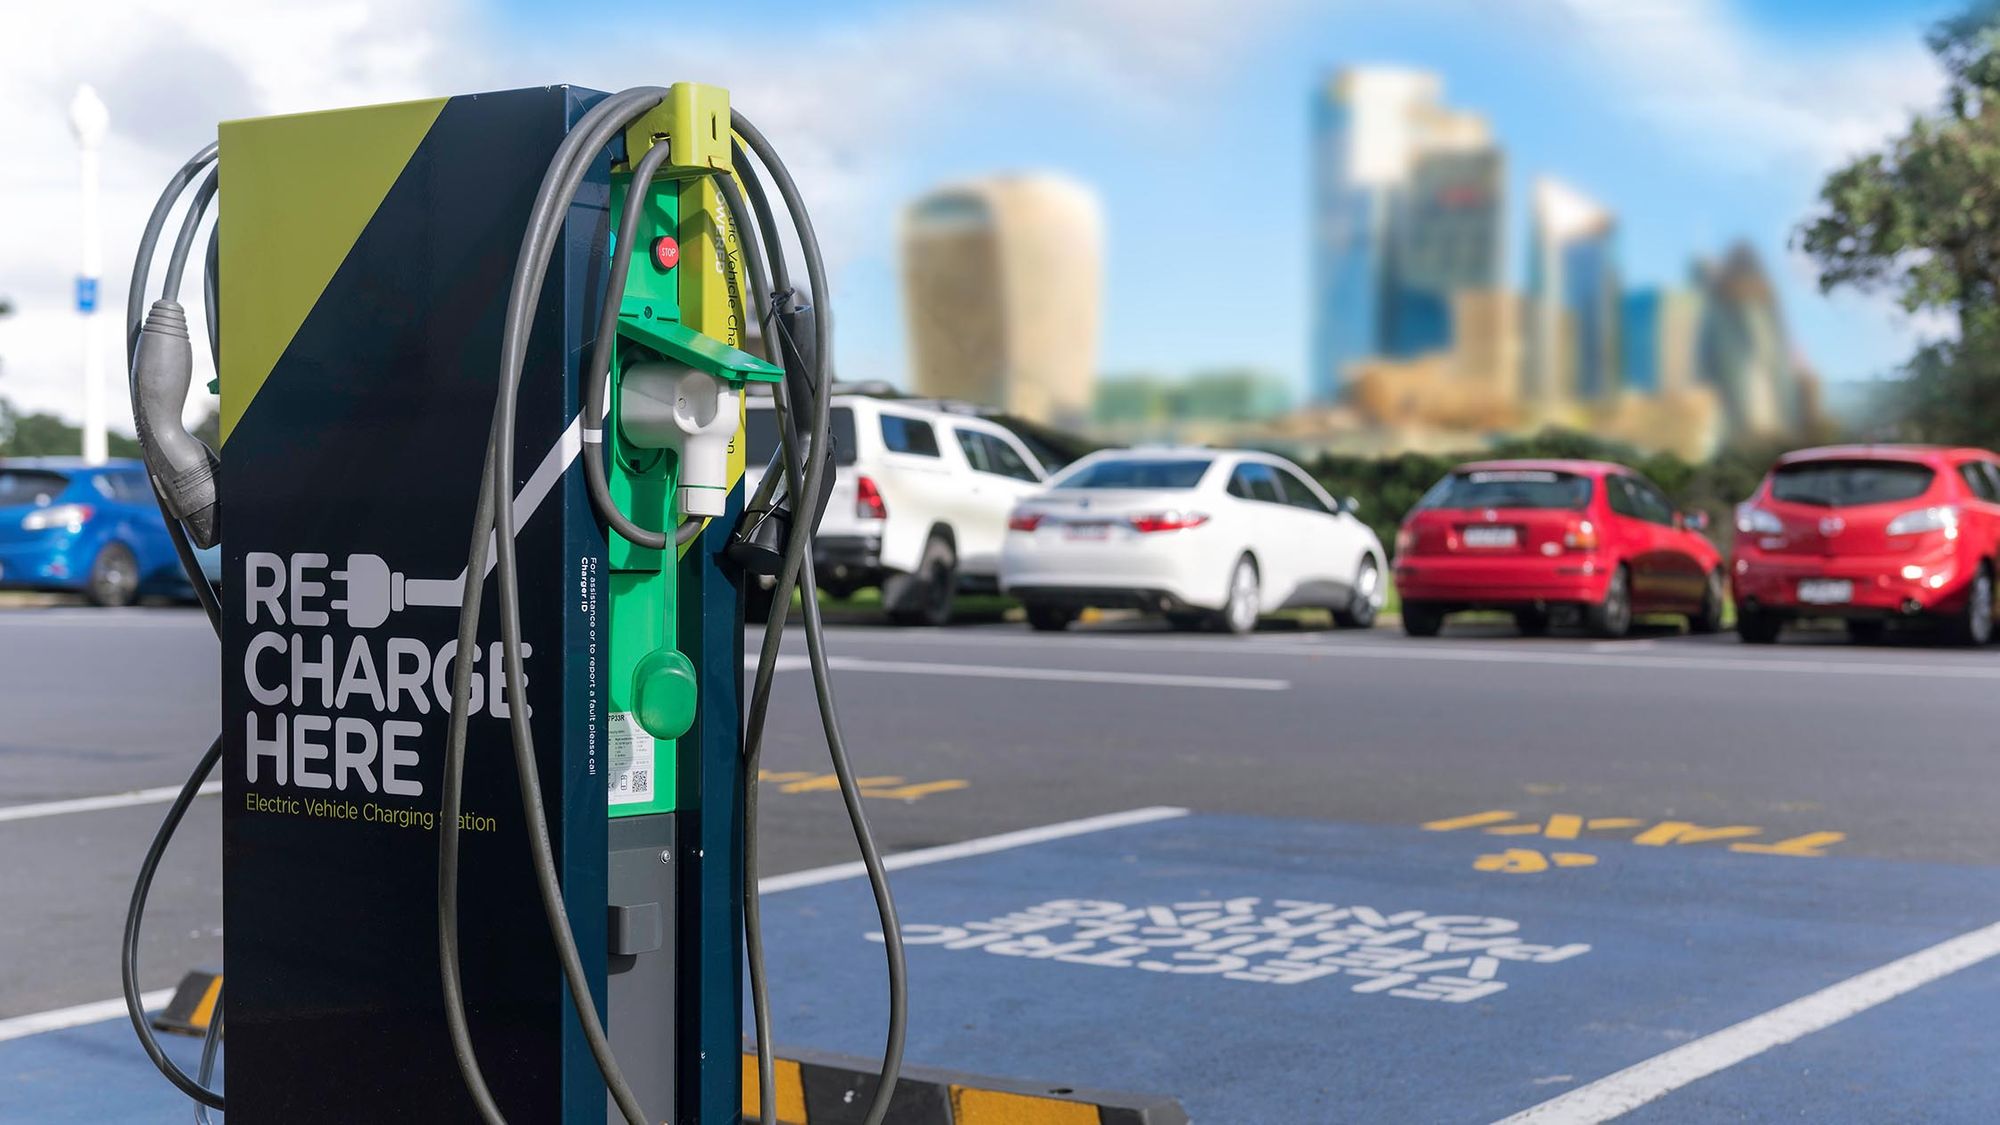 UK Seeing Rapid Growth Of EV Charging Infrastructure